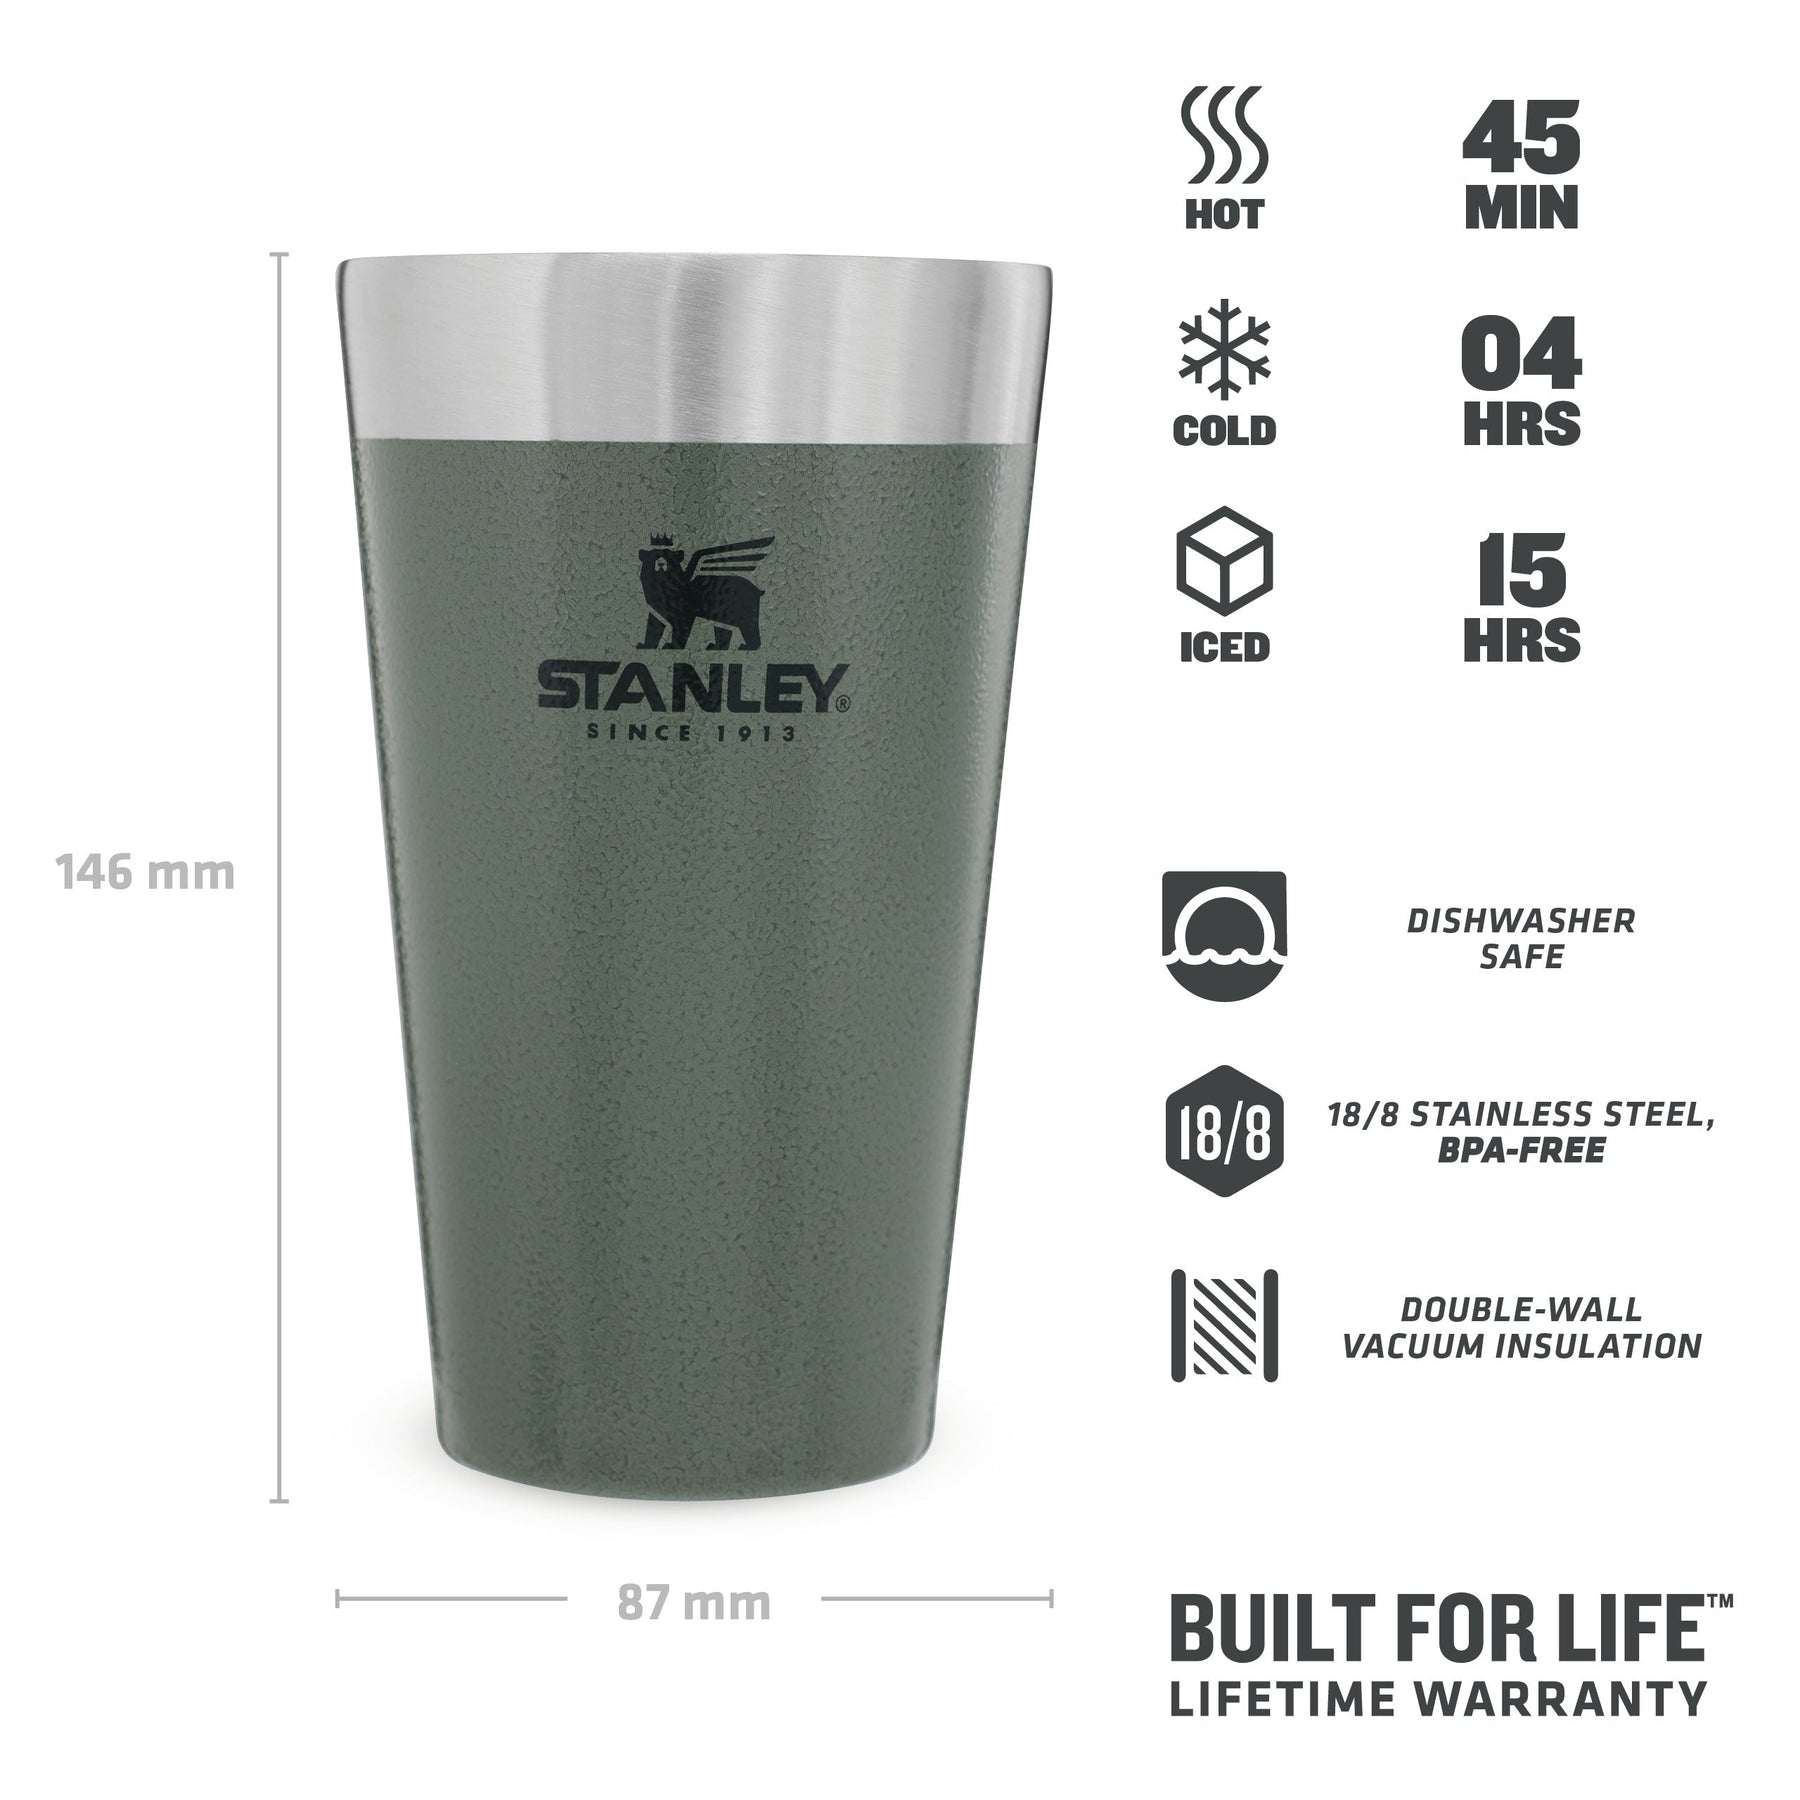 STANLEY Trigger Action Travel Mug 0.35L - Keeps Hot for 5 Hours - BPA-Free  - Thermos Flask for Hot or Cold Drinks - Leakproof Reusable Coffee Cup -  Dishwasher Safe - Matte Black: Home & Kitchen 